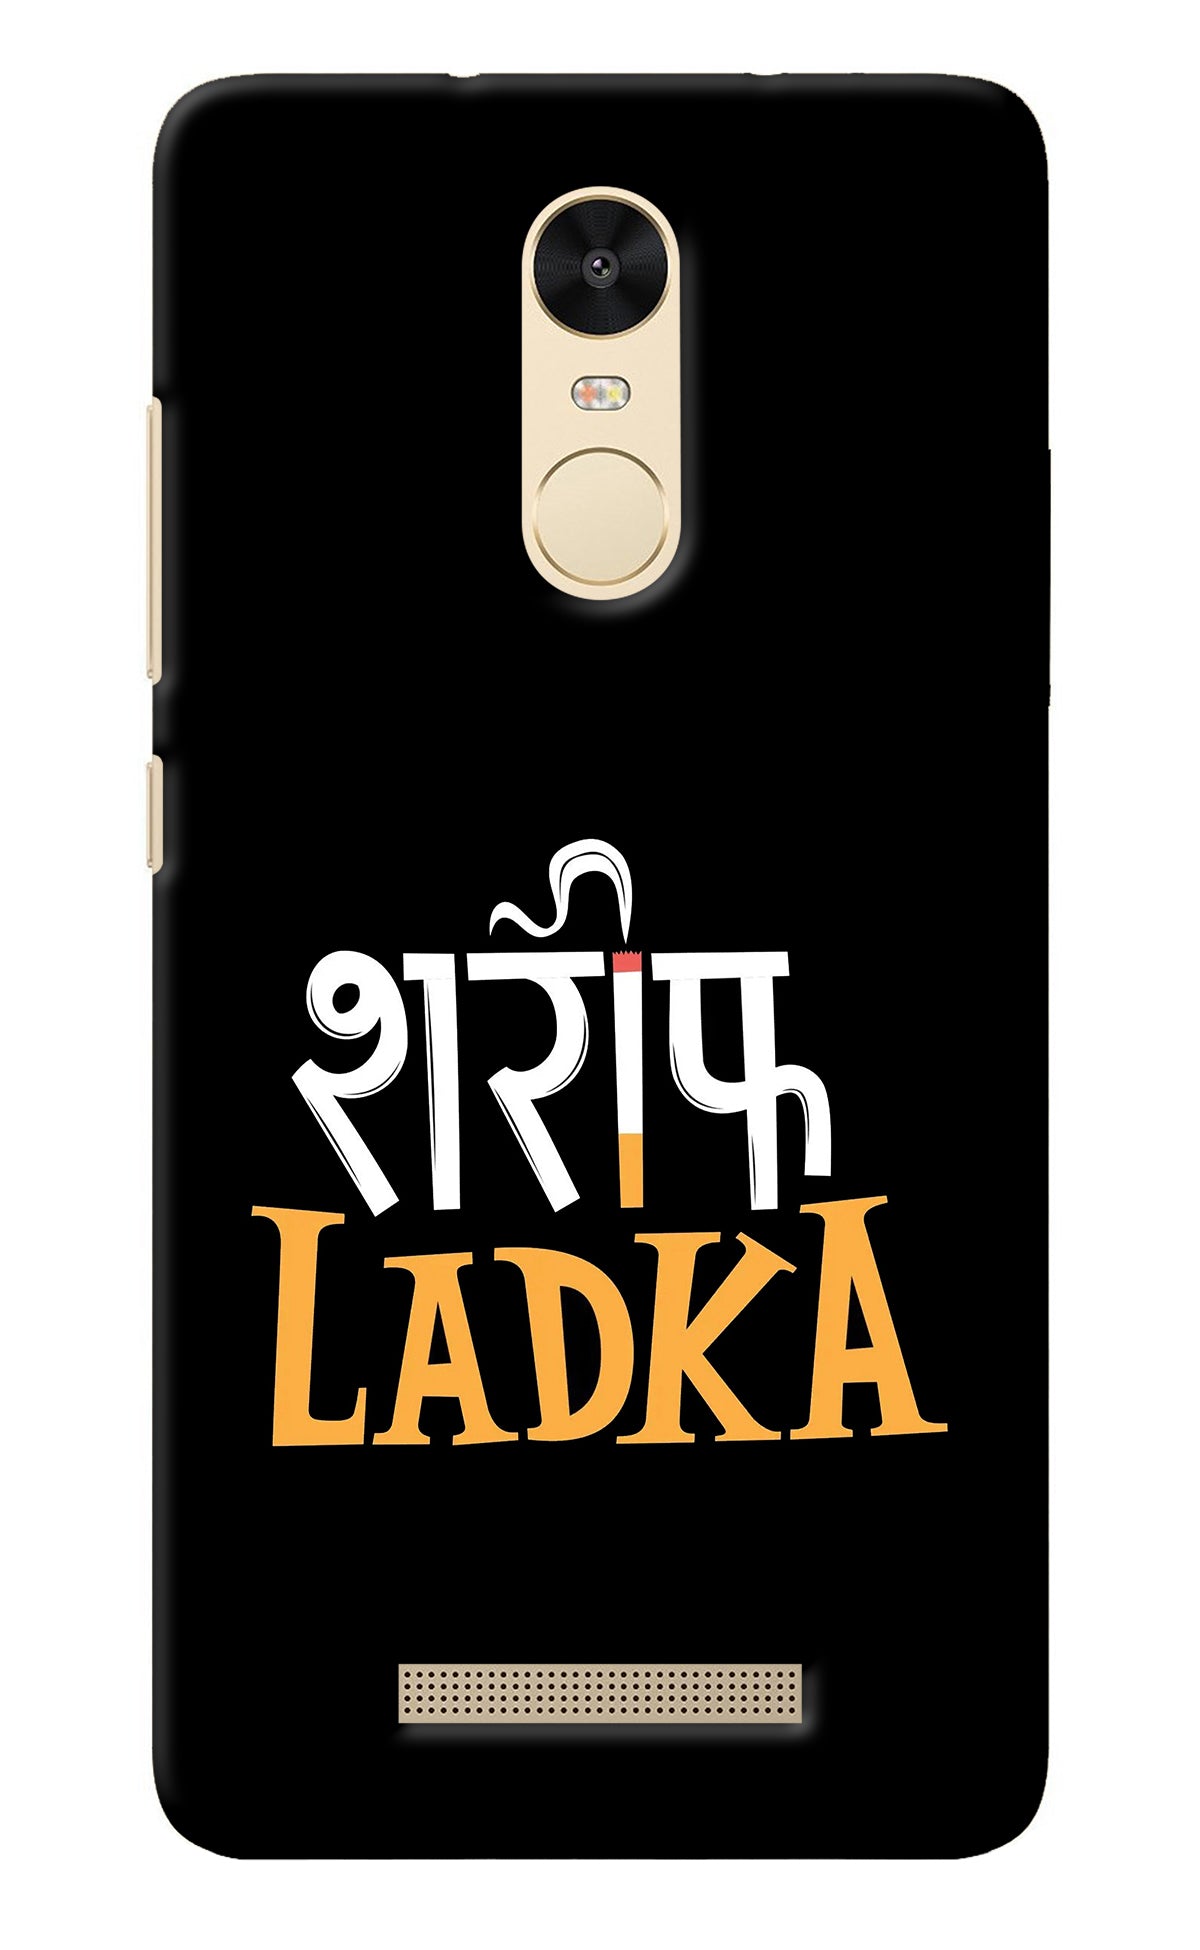 Shareef Ladka Redmi Note 3 Back Cover